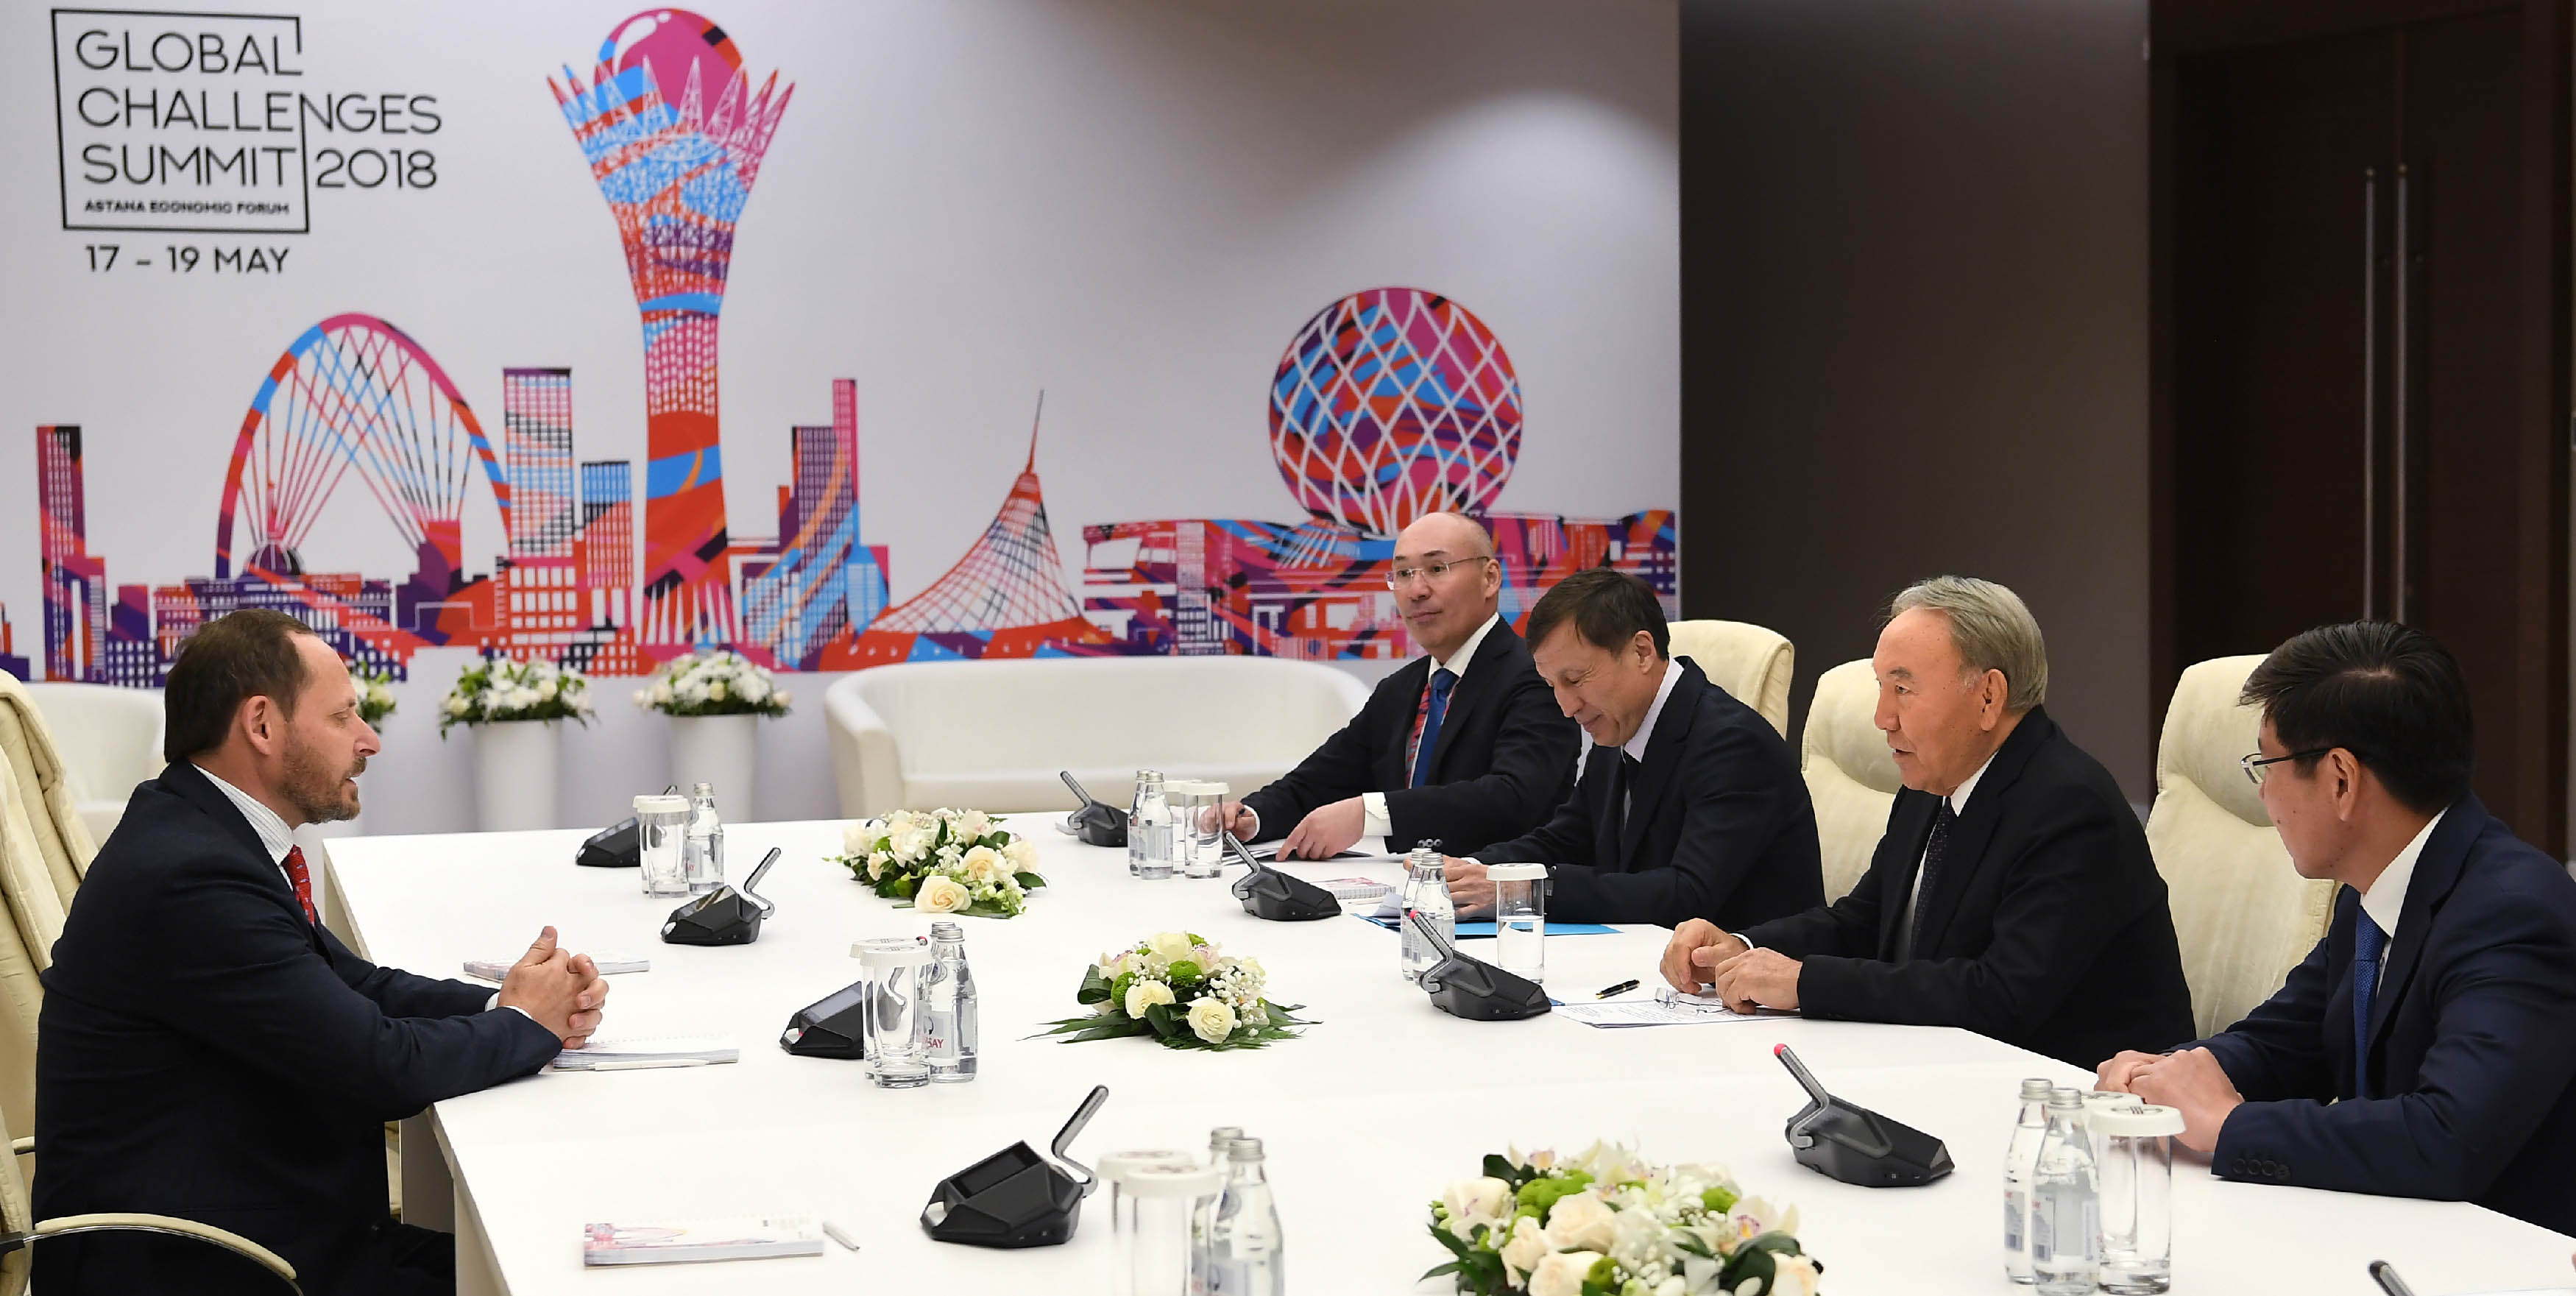 Kazakh President meets with Arkady Volozh, founder of Yandex